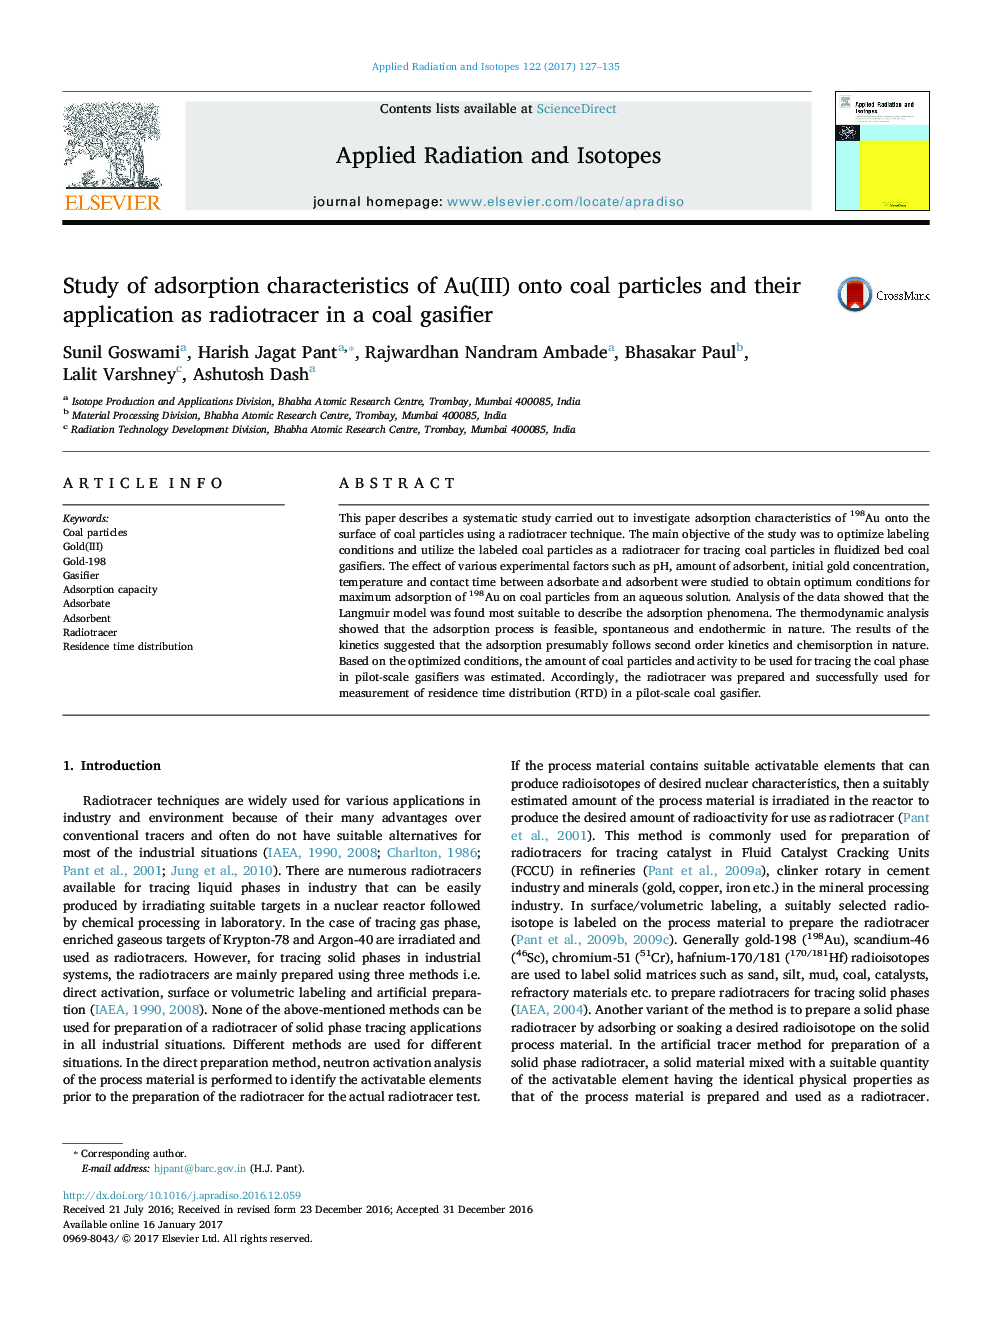 Study of adsorption characteristics of Au(III) onto coal particles and their application as radiotracer in a coal gasifier